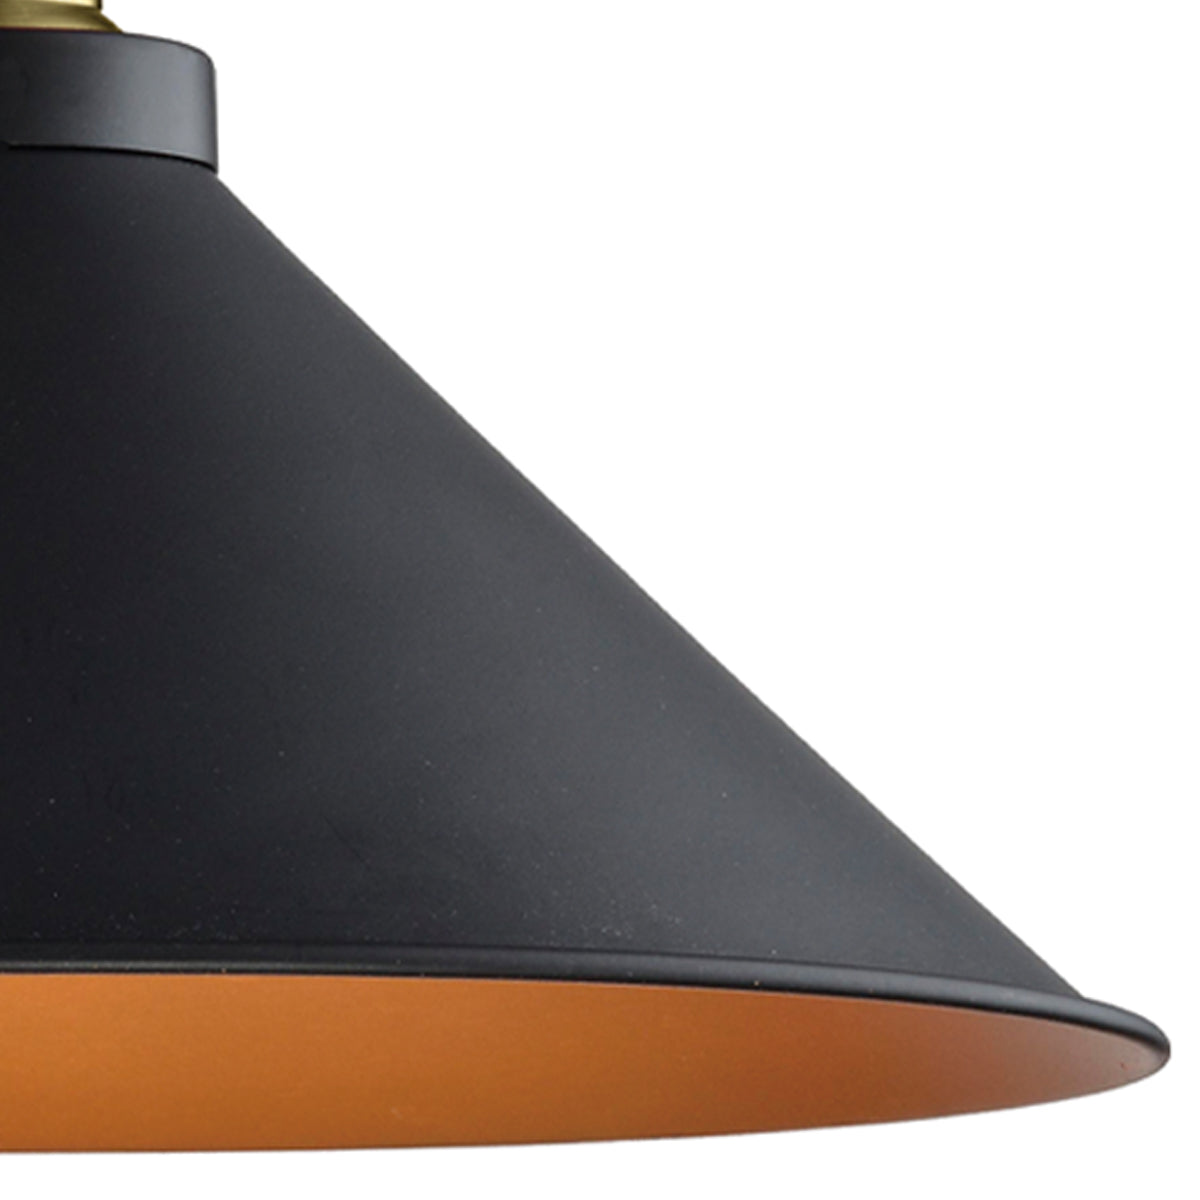 Black and gold lighting has been very popular in the lighting sector for some time. This is not only because the resulting contrast has such a harmonious appearance, but also because of the fantastic lighting effect that is produced by the golden inner surface of the light. Our Paige wall light is a very attractive light fitting for all kinds of modern living space.